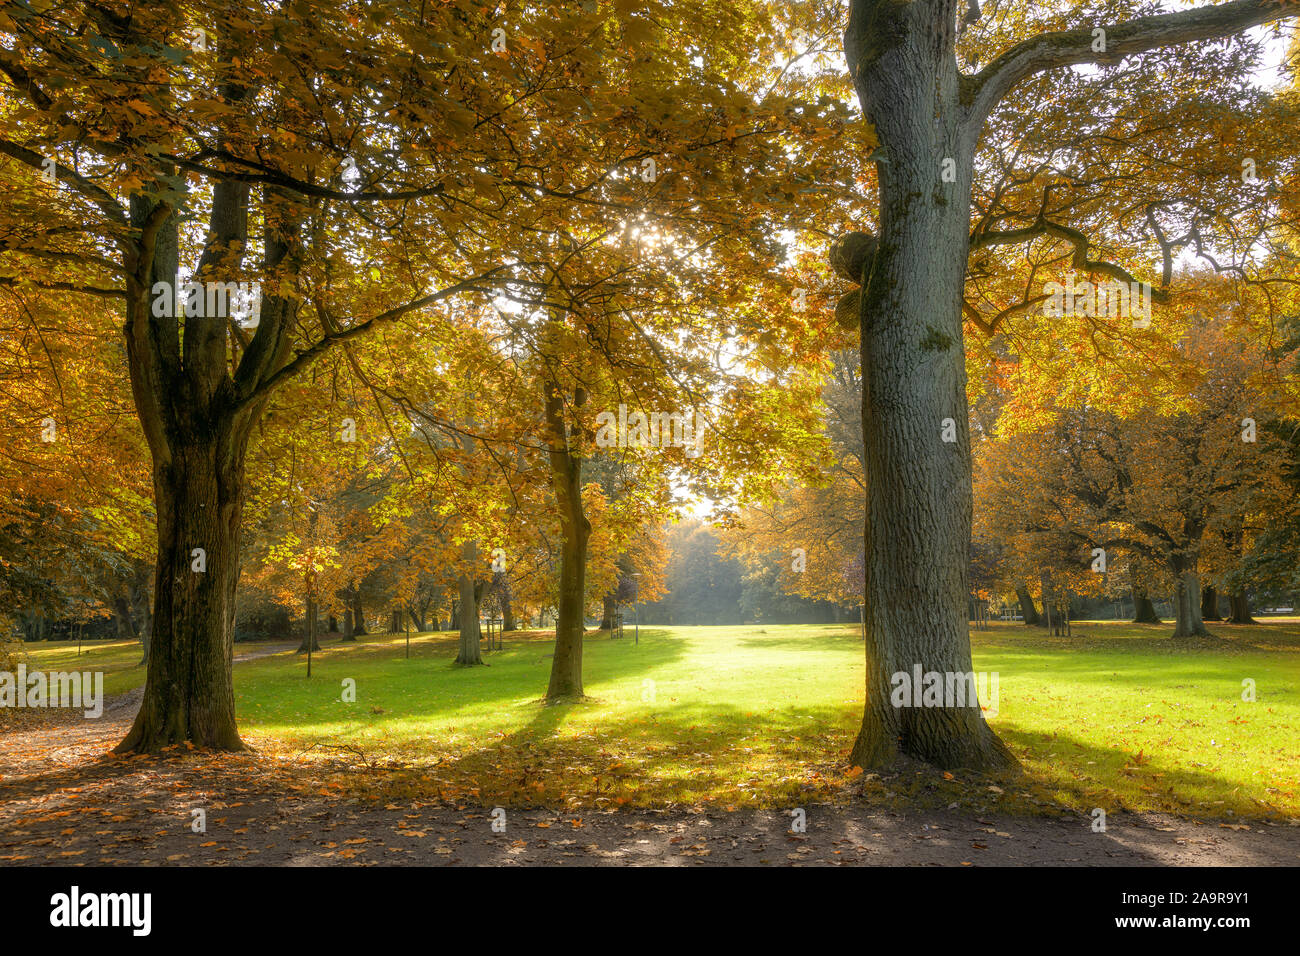 beautiful old trees with colorful autumn leaves in an old park, seasonal nature background Stock Photo